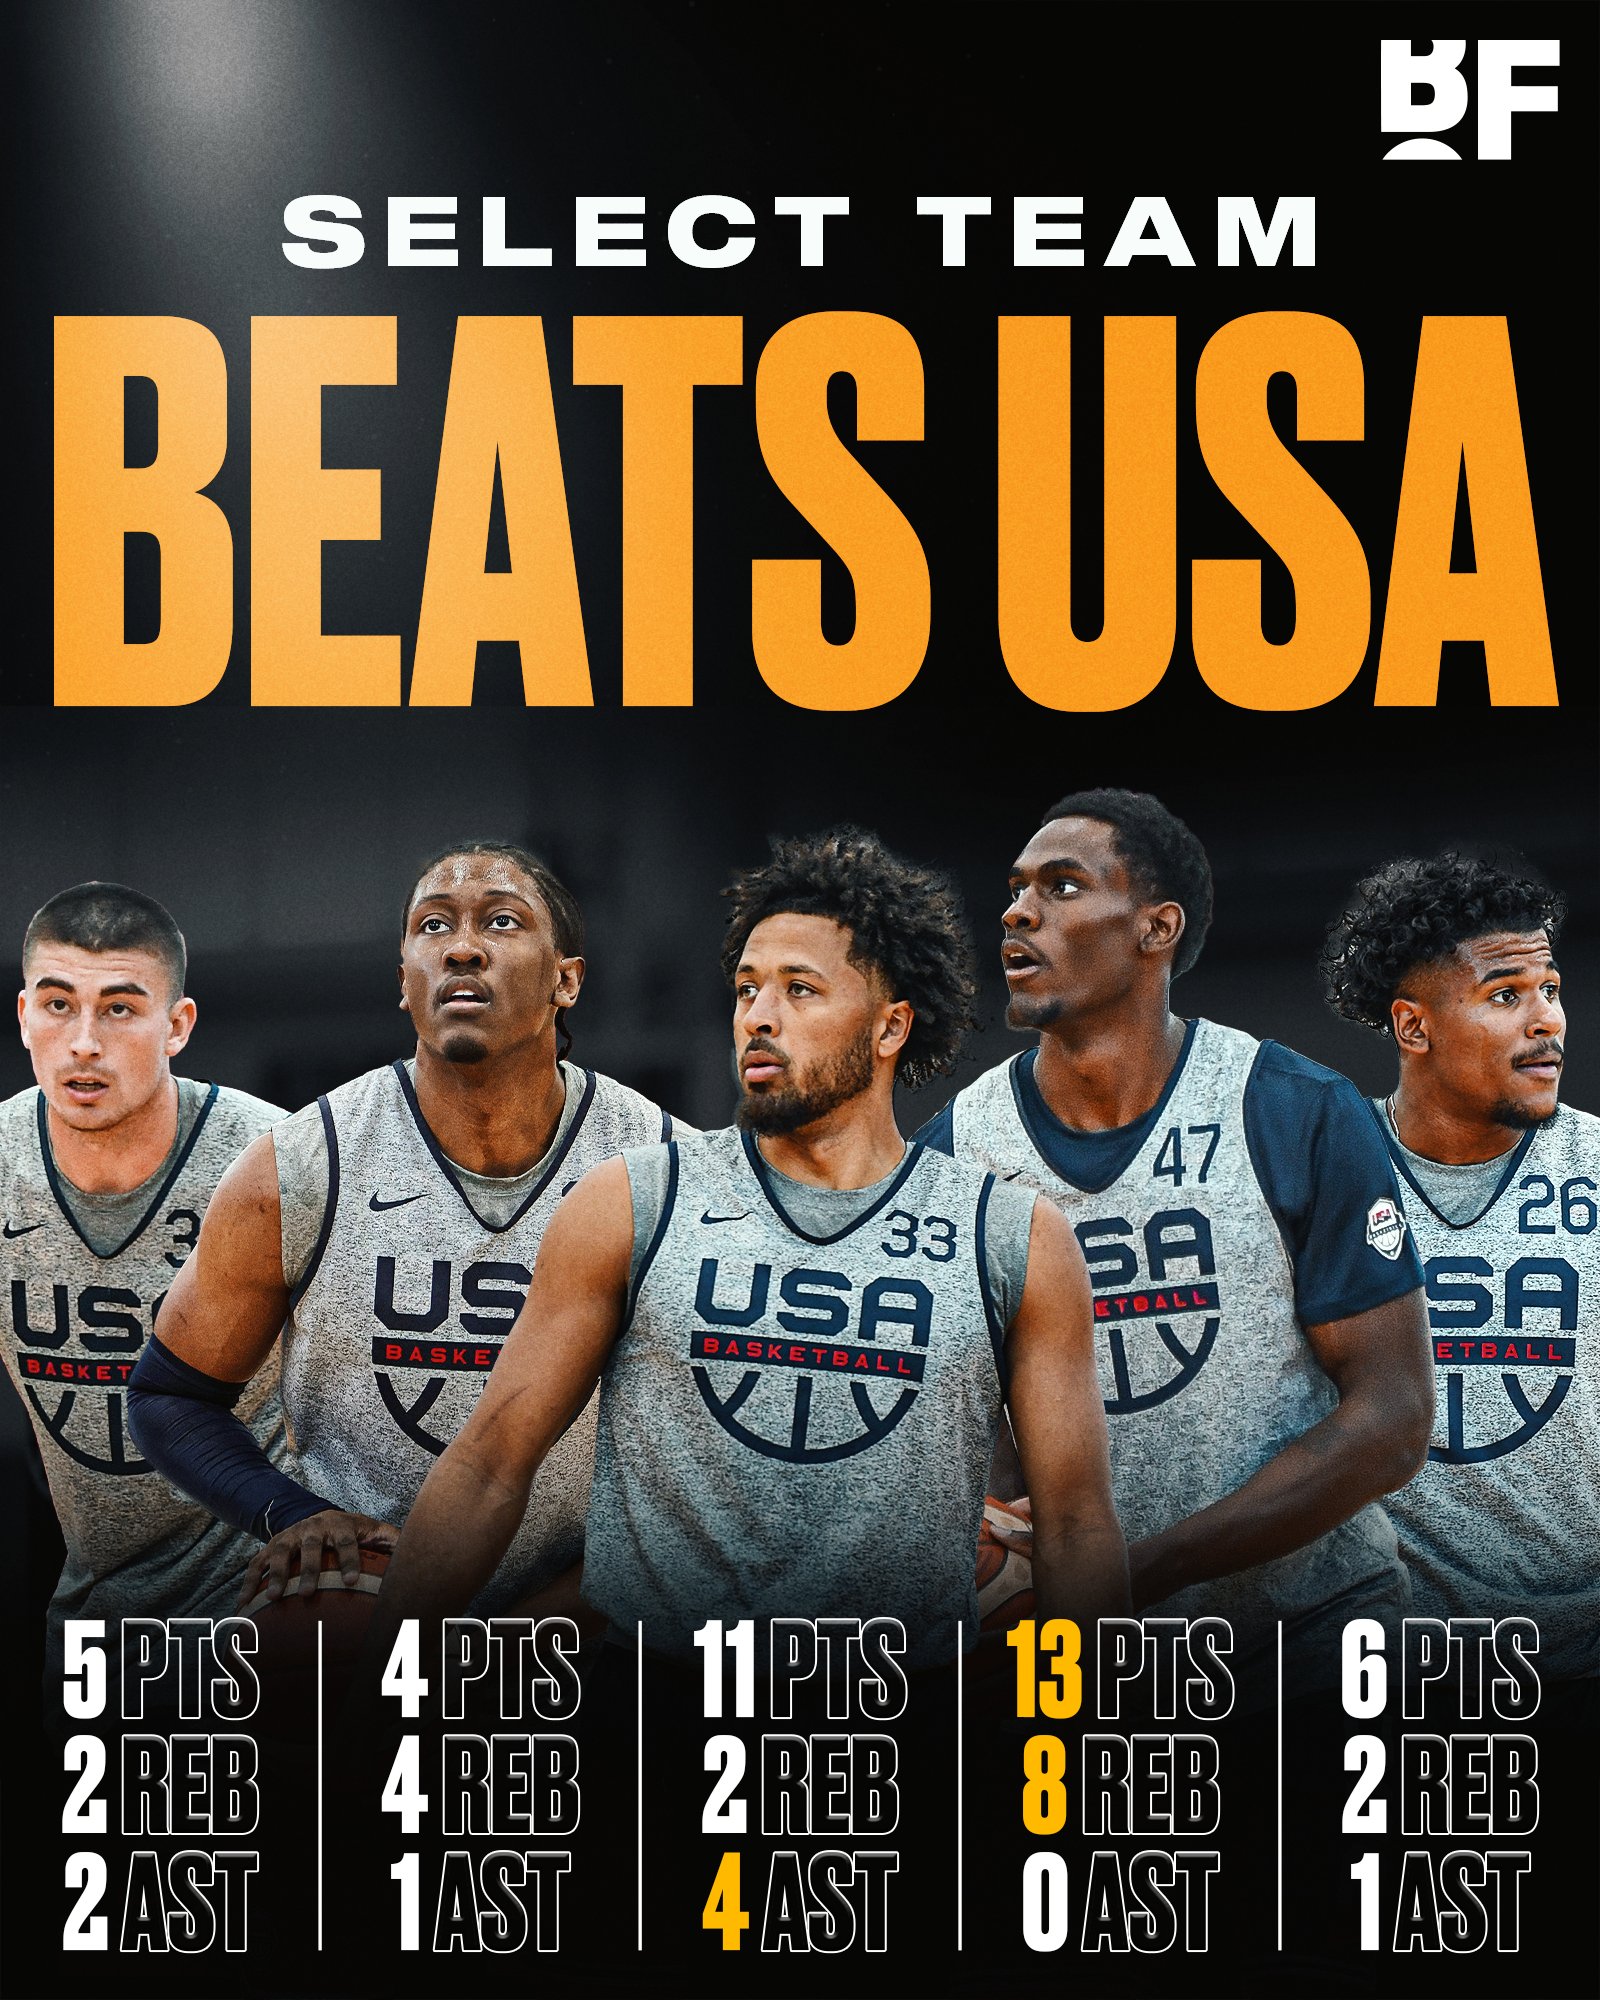 USA Basketball is putting the 'team' back in Team USA with